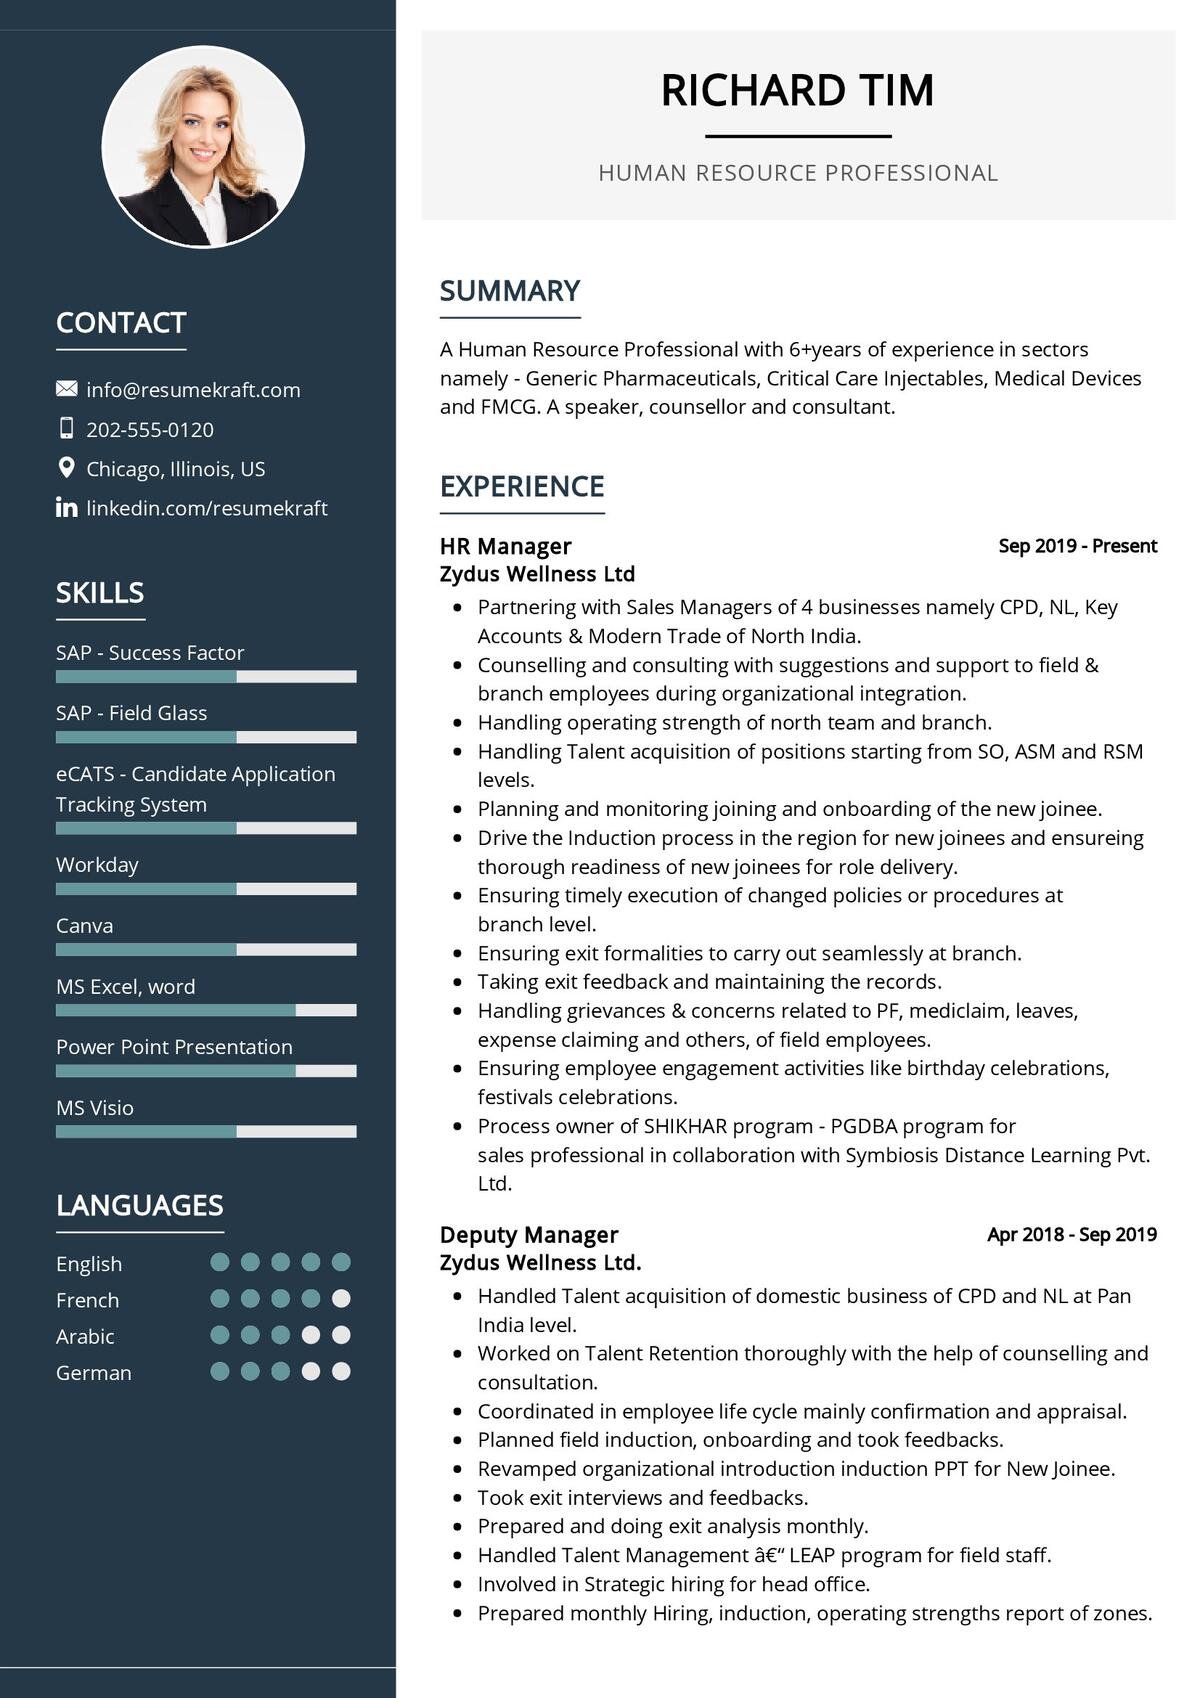 who can help me with a resume